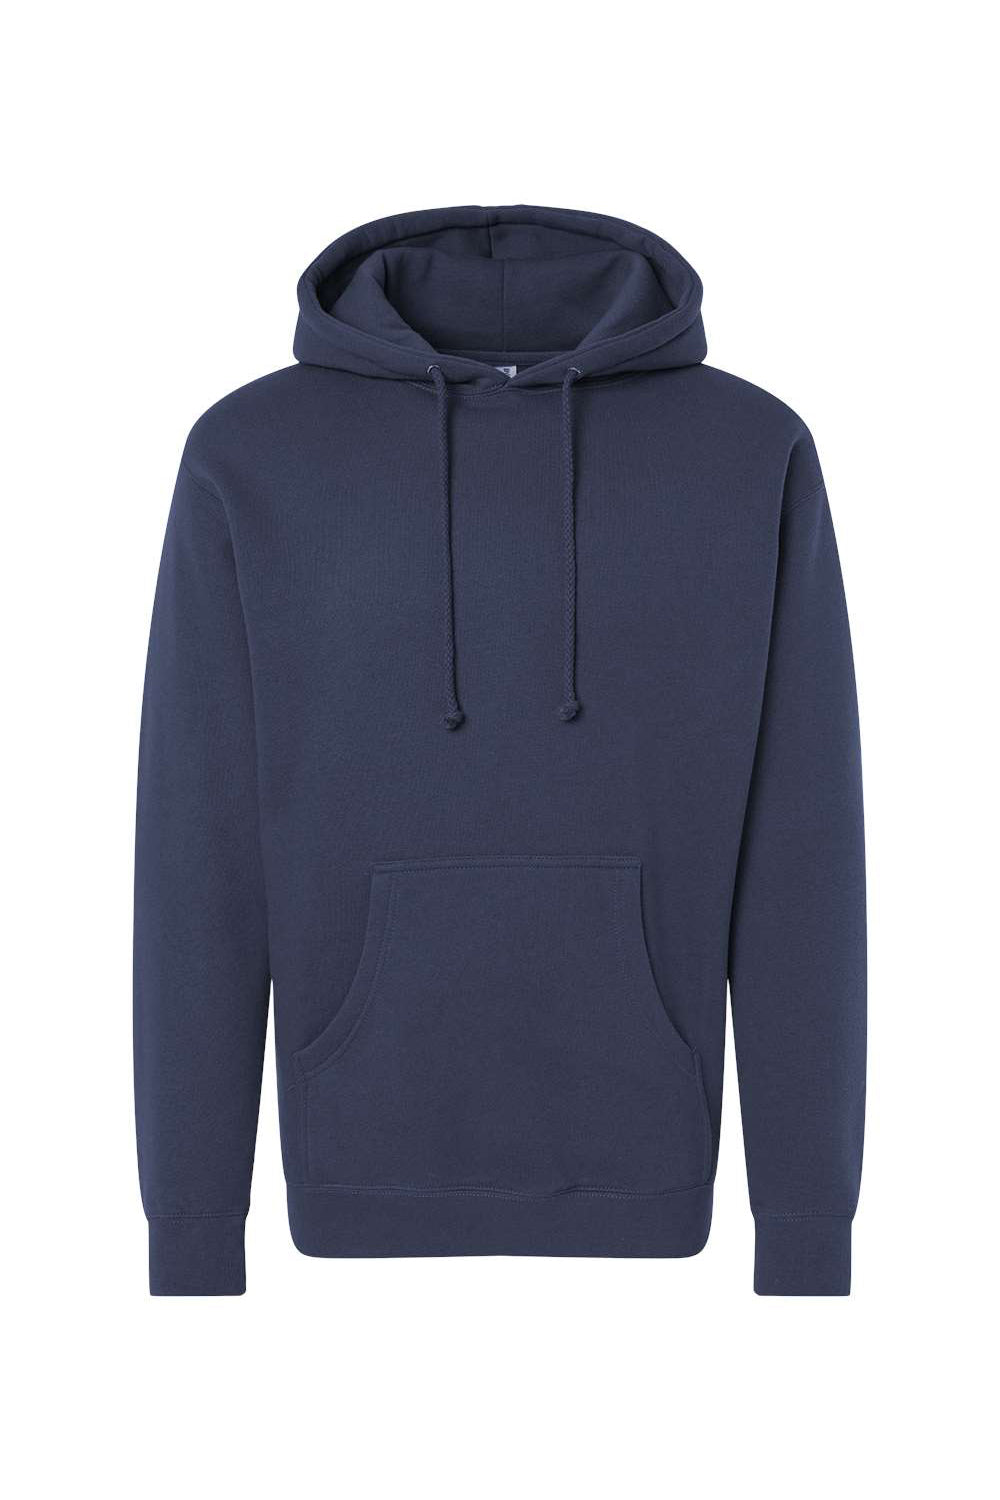 Independent Trading Co. IND4000 Mens Hooded Sweatshirt Hoodie Classic Navy Blue Flat Front